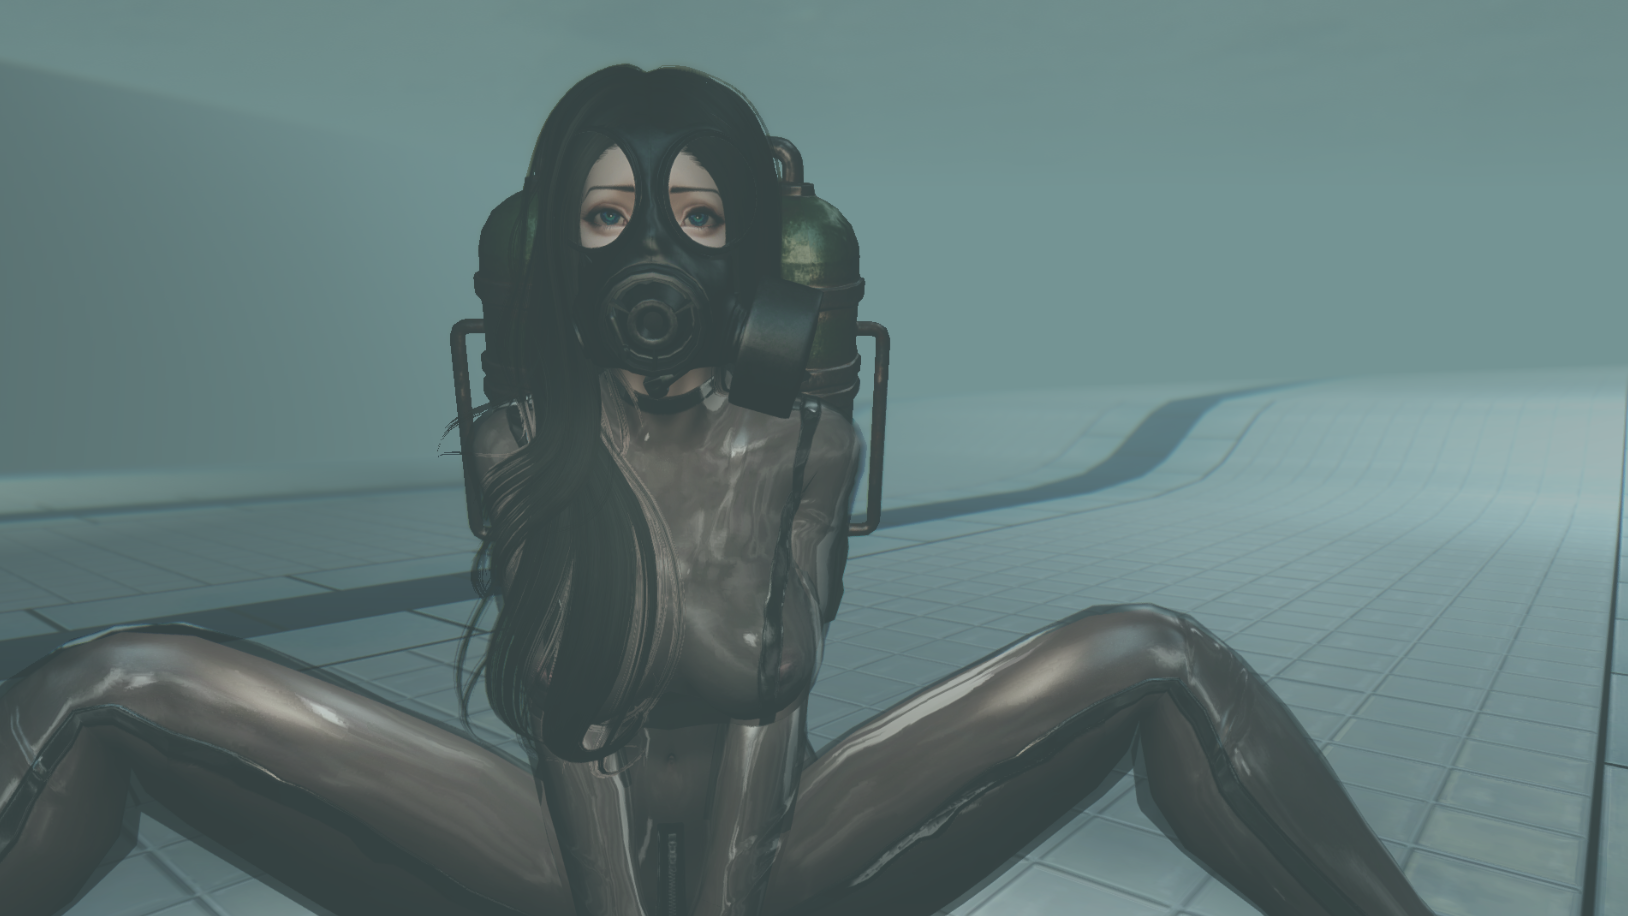 820388148_latexdiving12.png.a9f82c78552b64eb9d900ae52b879bb8.png